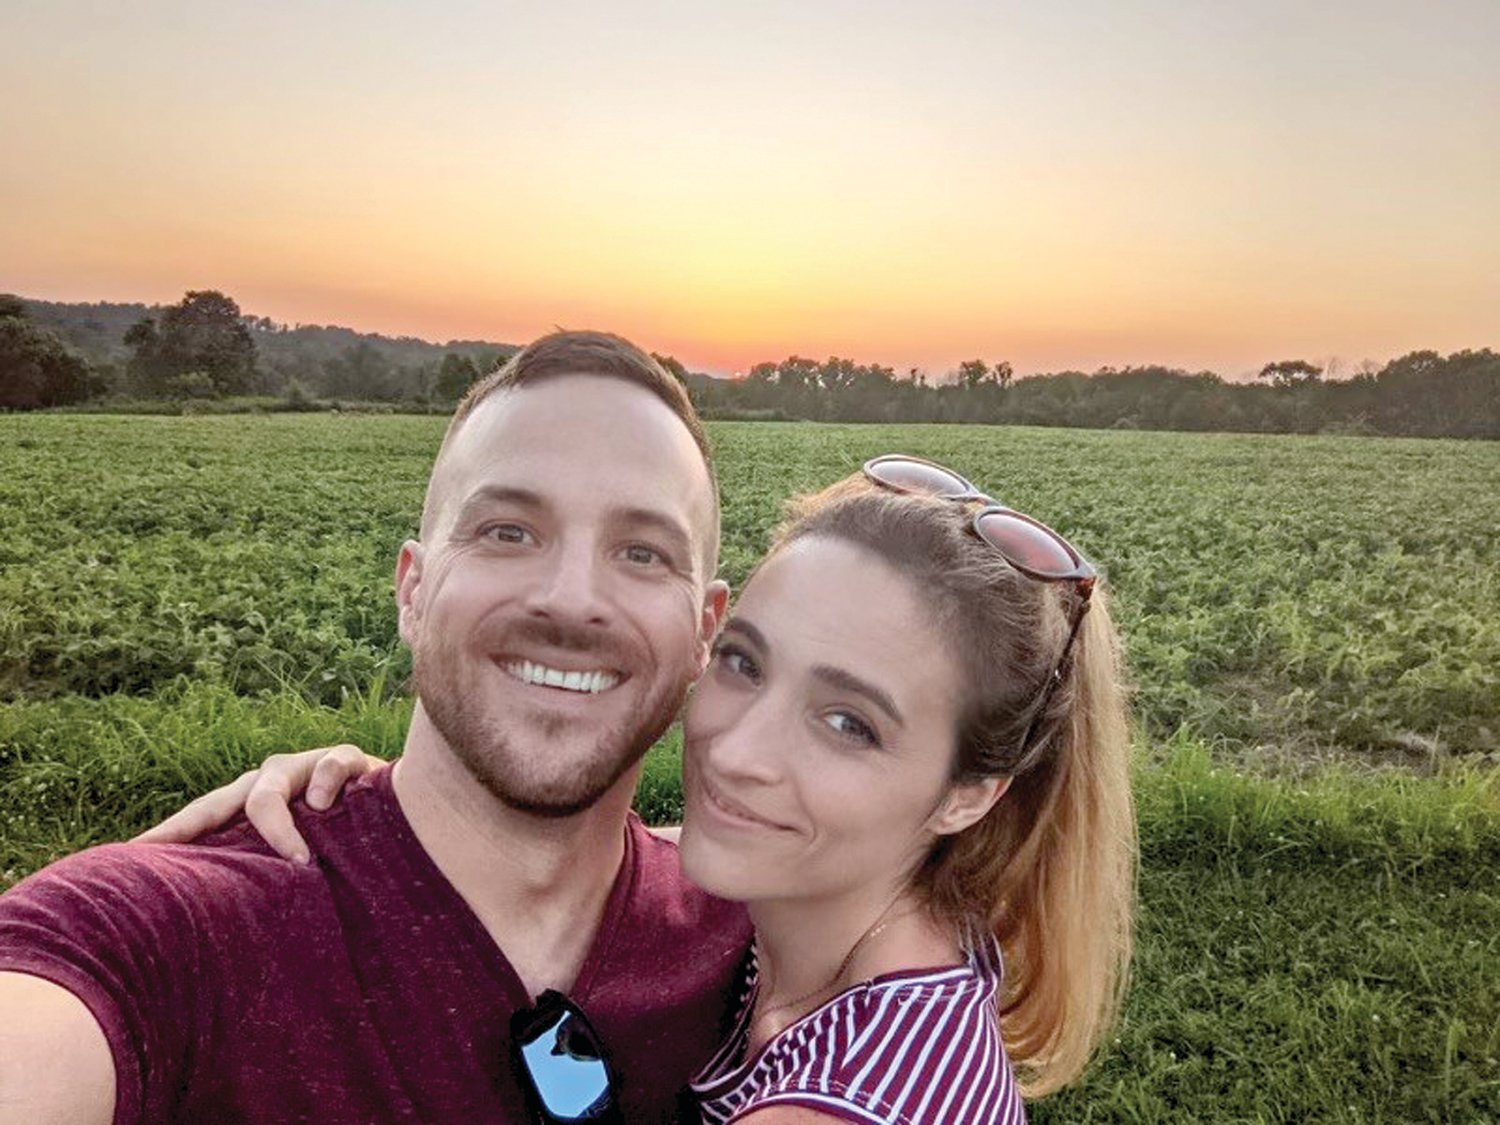 Software engineer Chris Crook knew Christy Altomare long before she was a Broadway star. They were classmates at Charles Boehm Middle School. In 2021, they reconnected when he attended one of her shows at the Bucks County Playhouse. They got married in September.